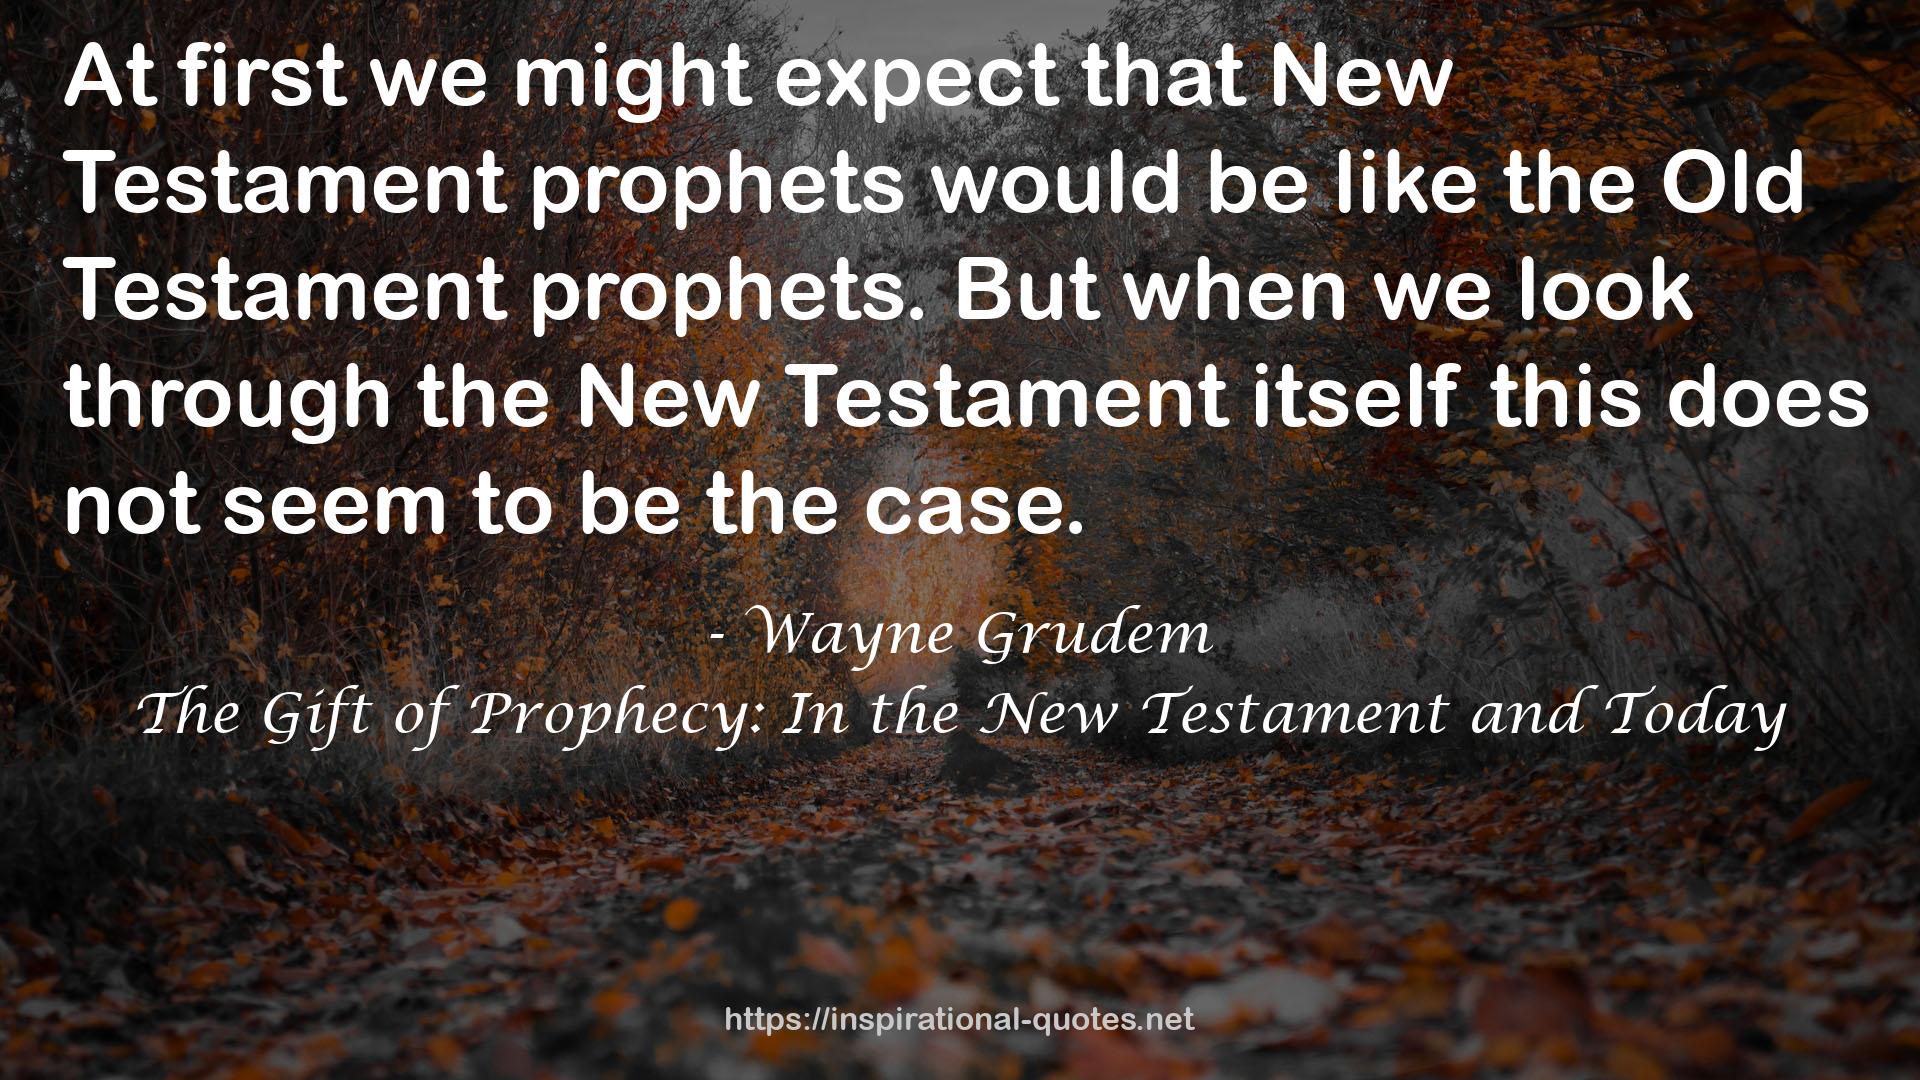 The Gift of Prophecy: In the New Testament and Today QUOTES